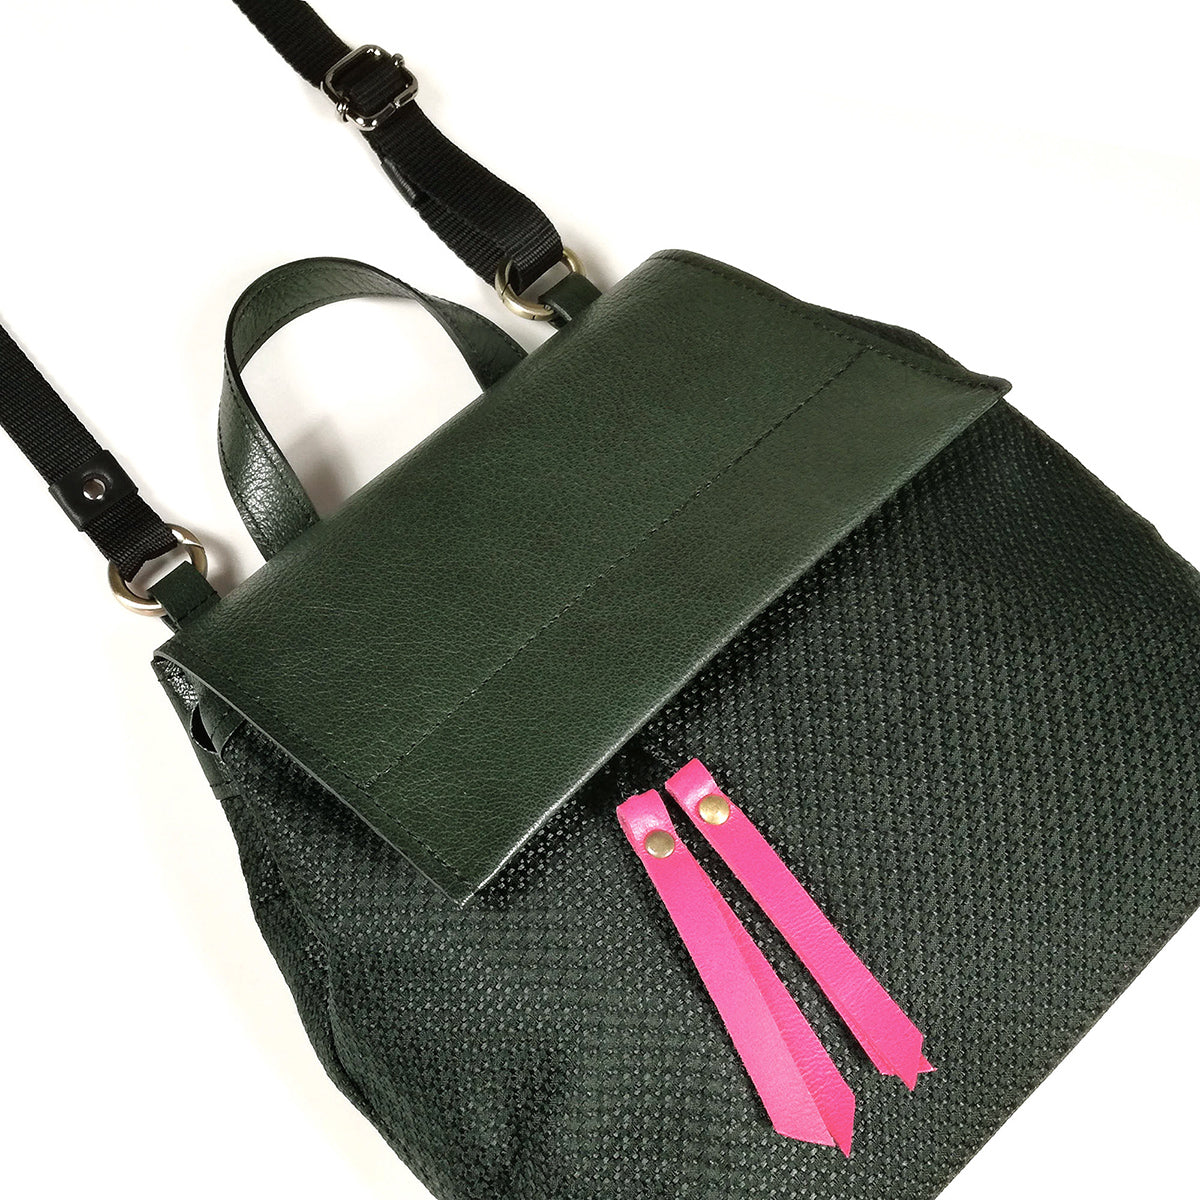 Green convertible backpack | Alice